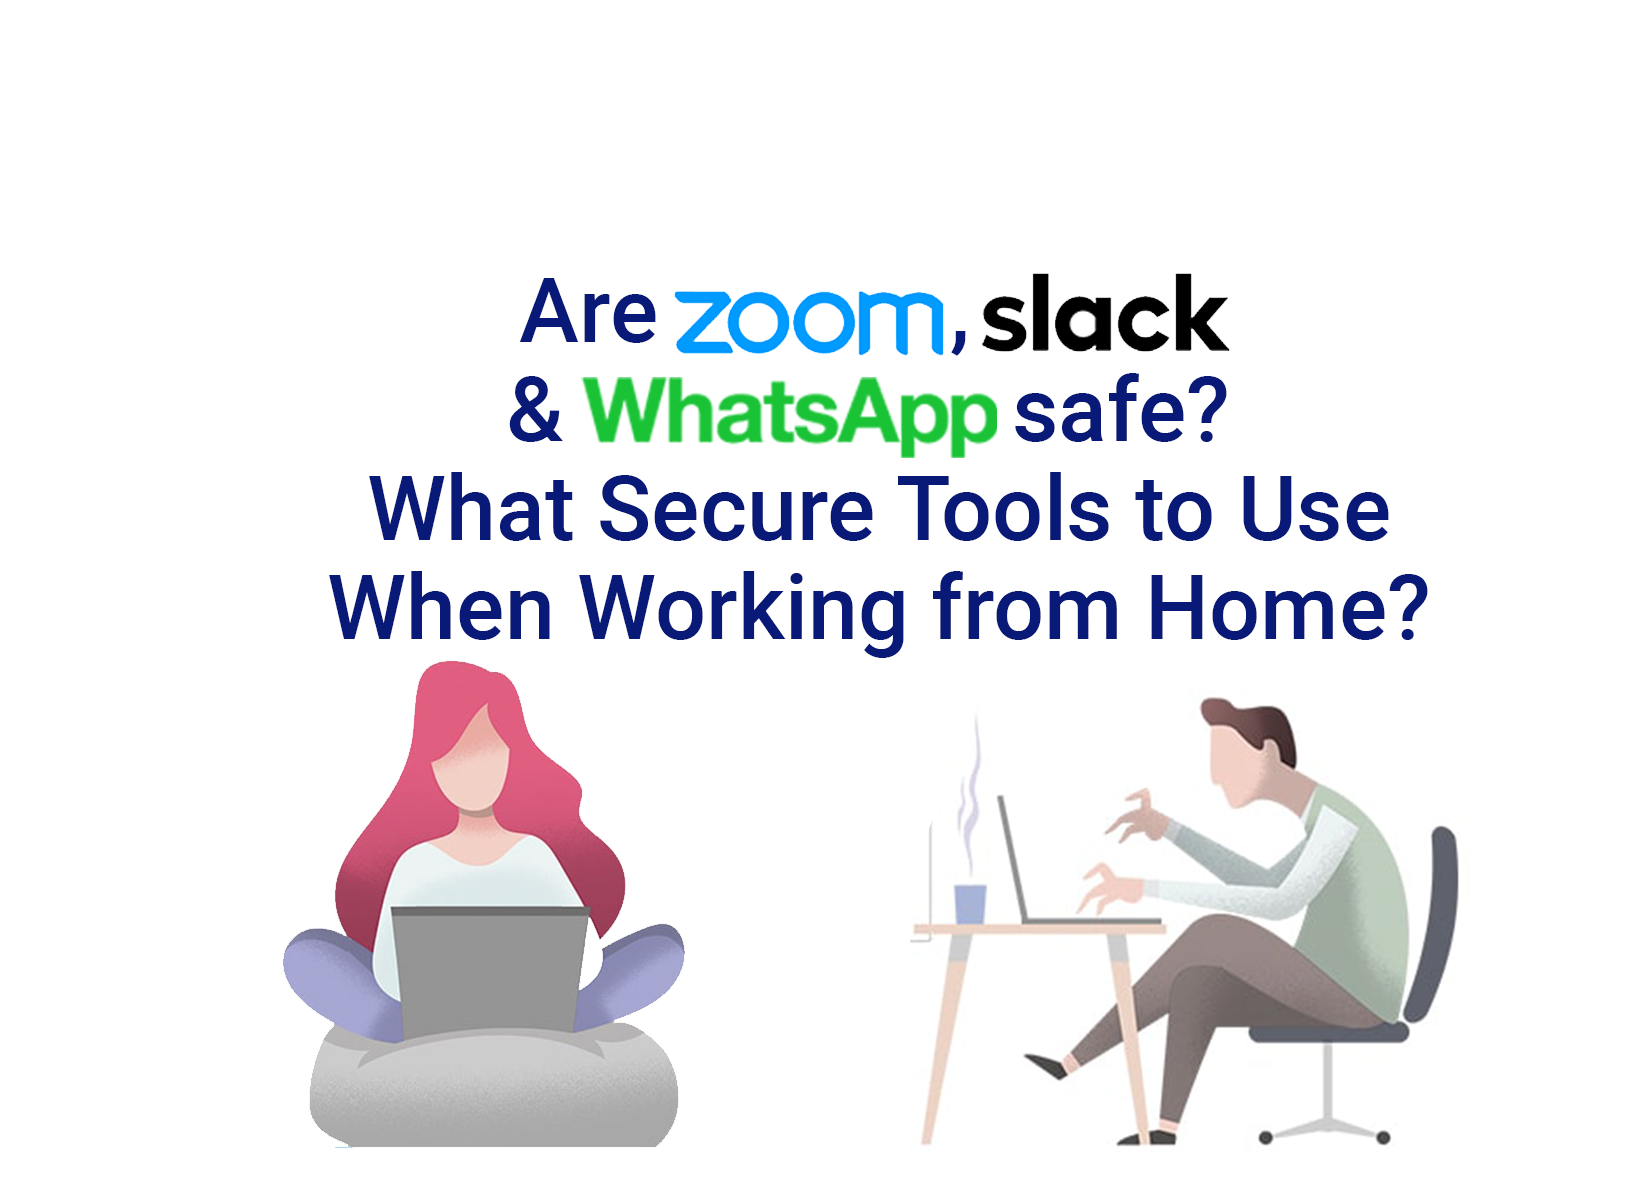 Are Zoom, Slack, WhatsApp secure? What secure tools to use when working from home?